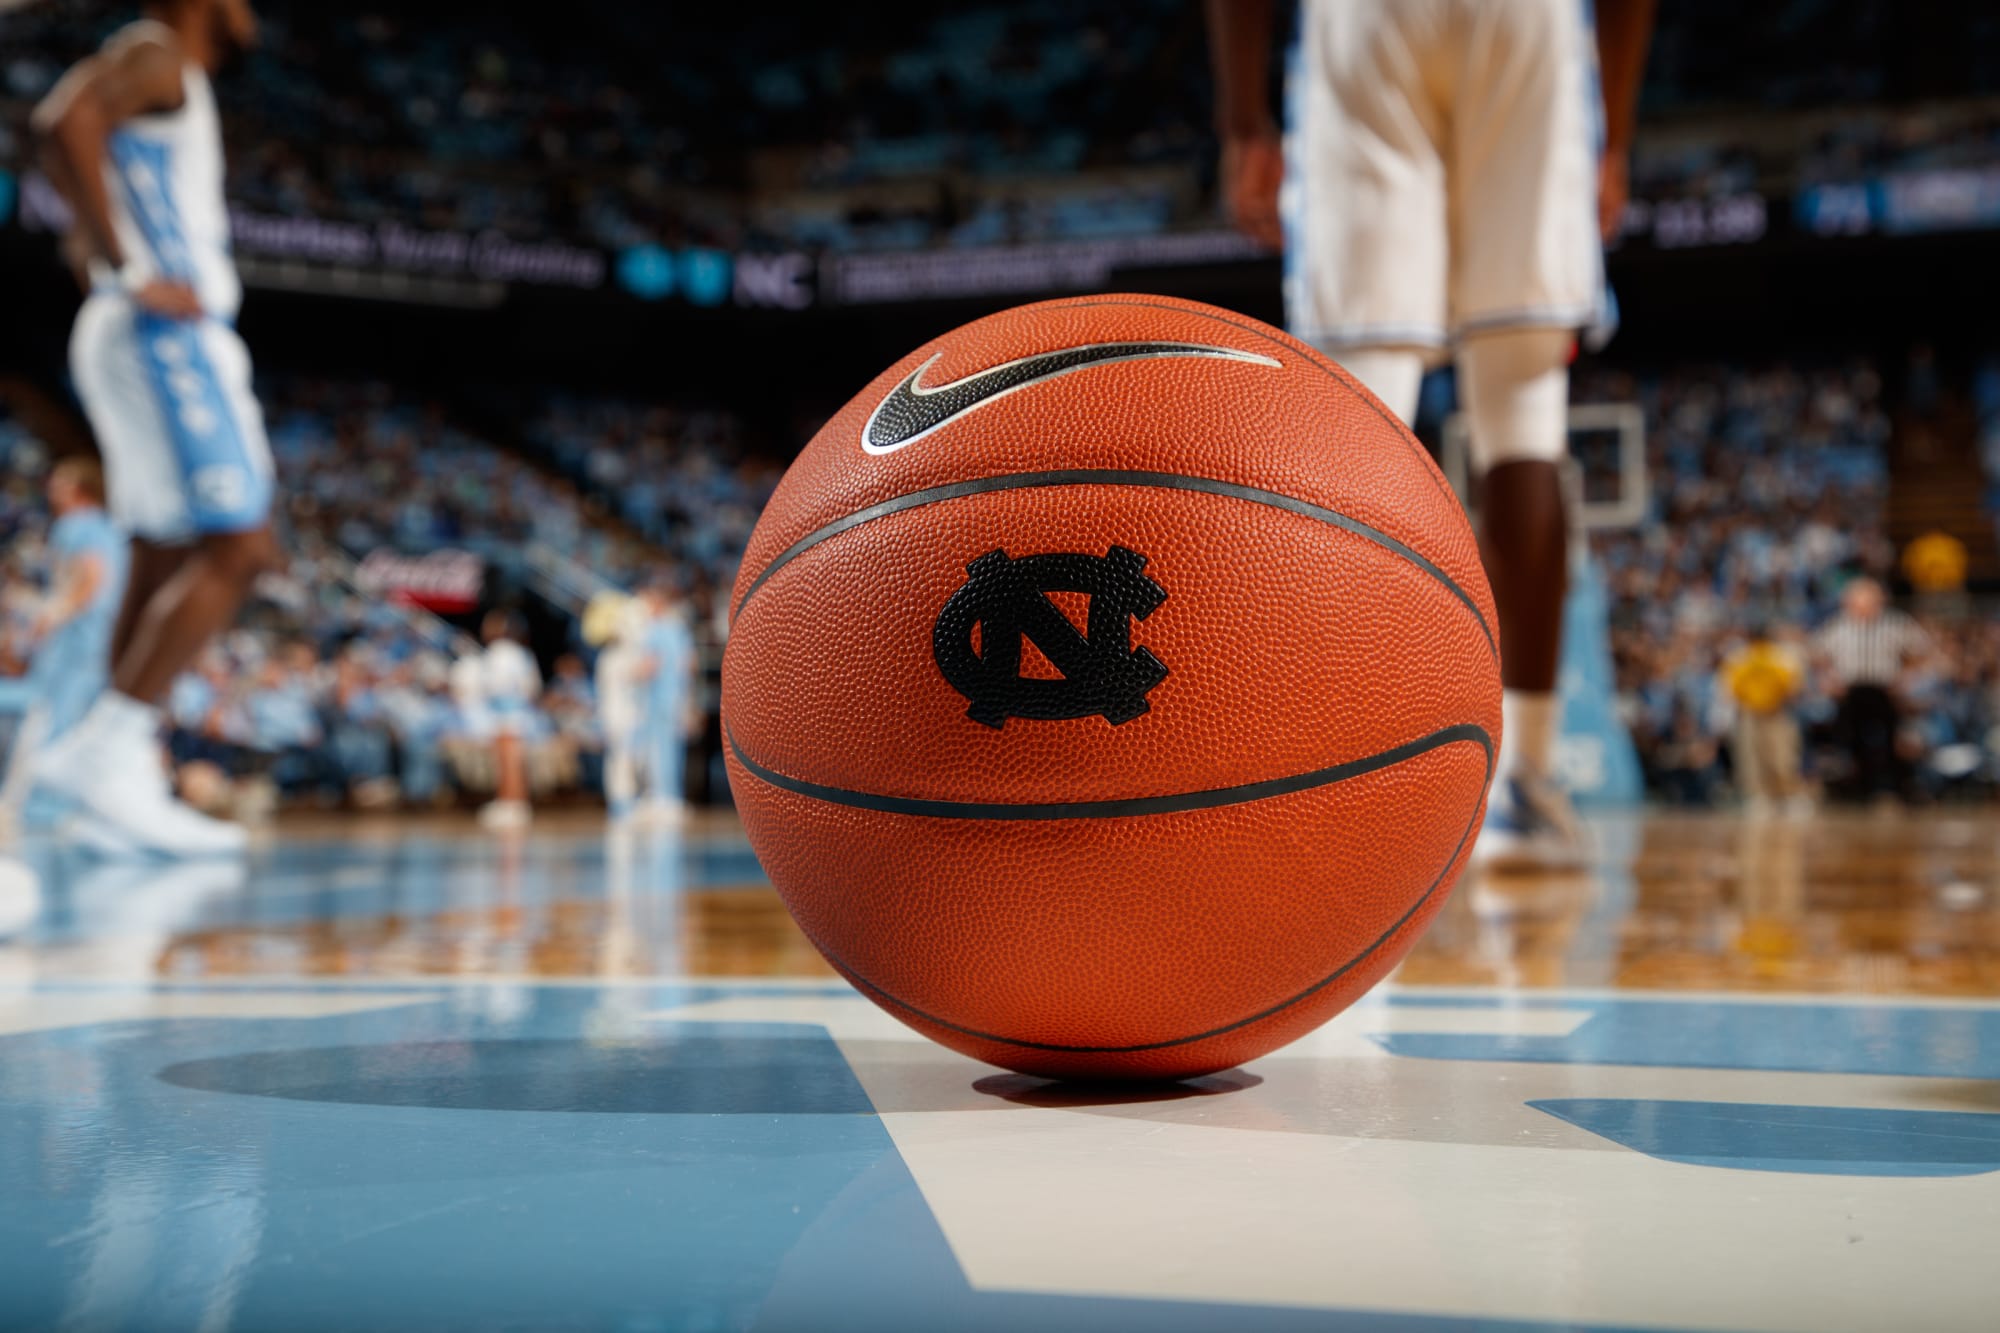 Kennedy Meeks, P.J. Hairston To Play In TBT